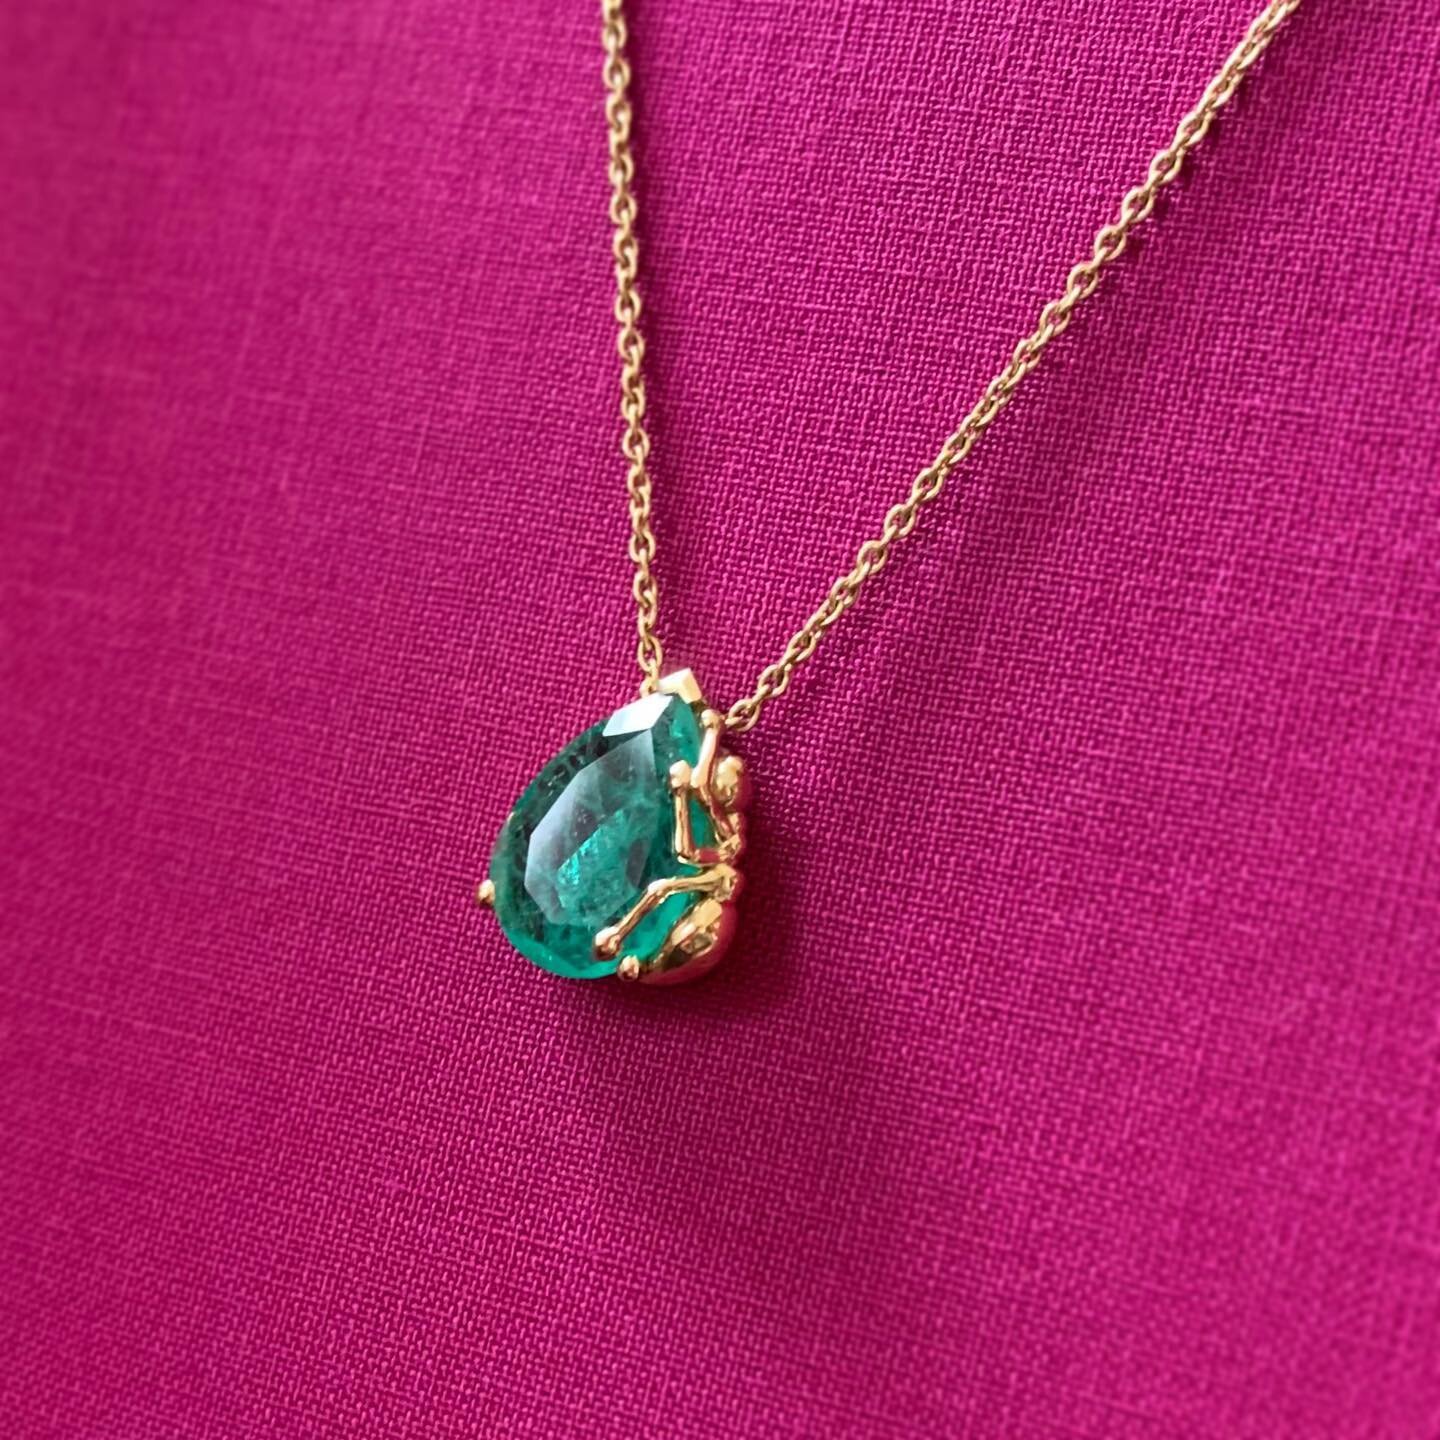 Every jewel tells its own story - this necklace was commissioned to commemorate a couple&rsquo;s South American adventure by showcasing the emerald that they discovered on their travels. 🐜 
🟢
🟢
🟢
#emerald #finejewellery #bespoke #comission #loveg